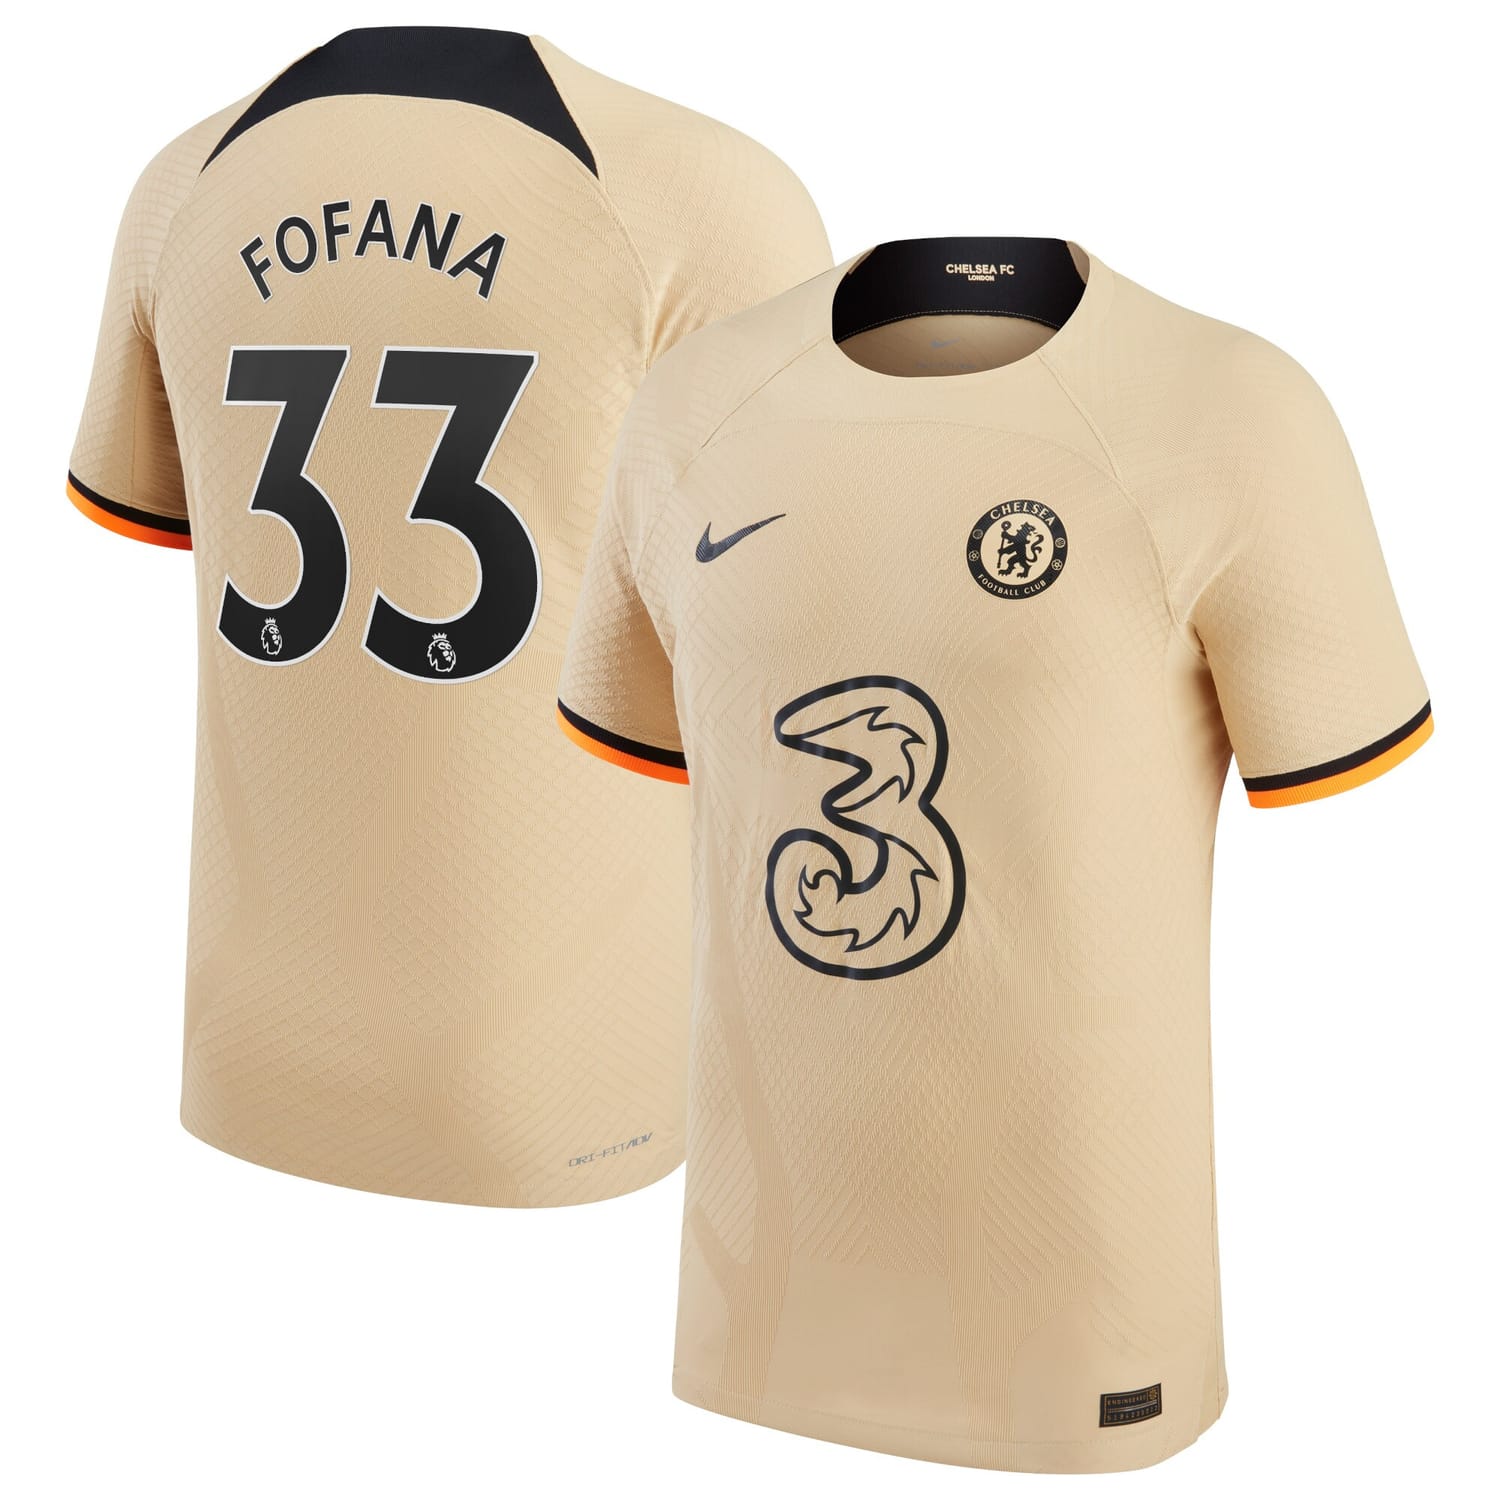 Premier League Chelsea Third Authentic Jersey Shirt 2022-23 player Wesley Fofana 33 printing for Men